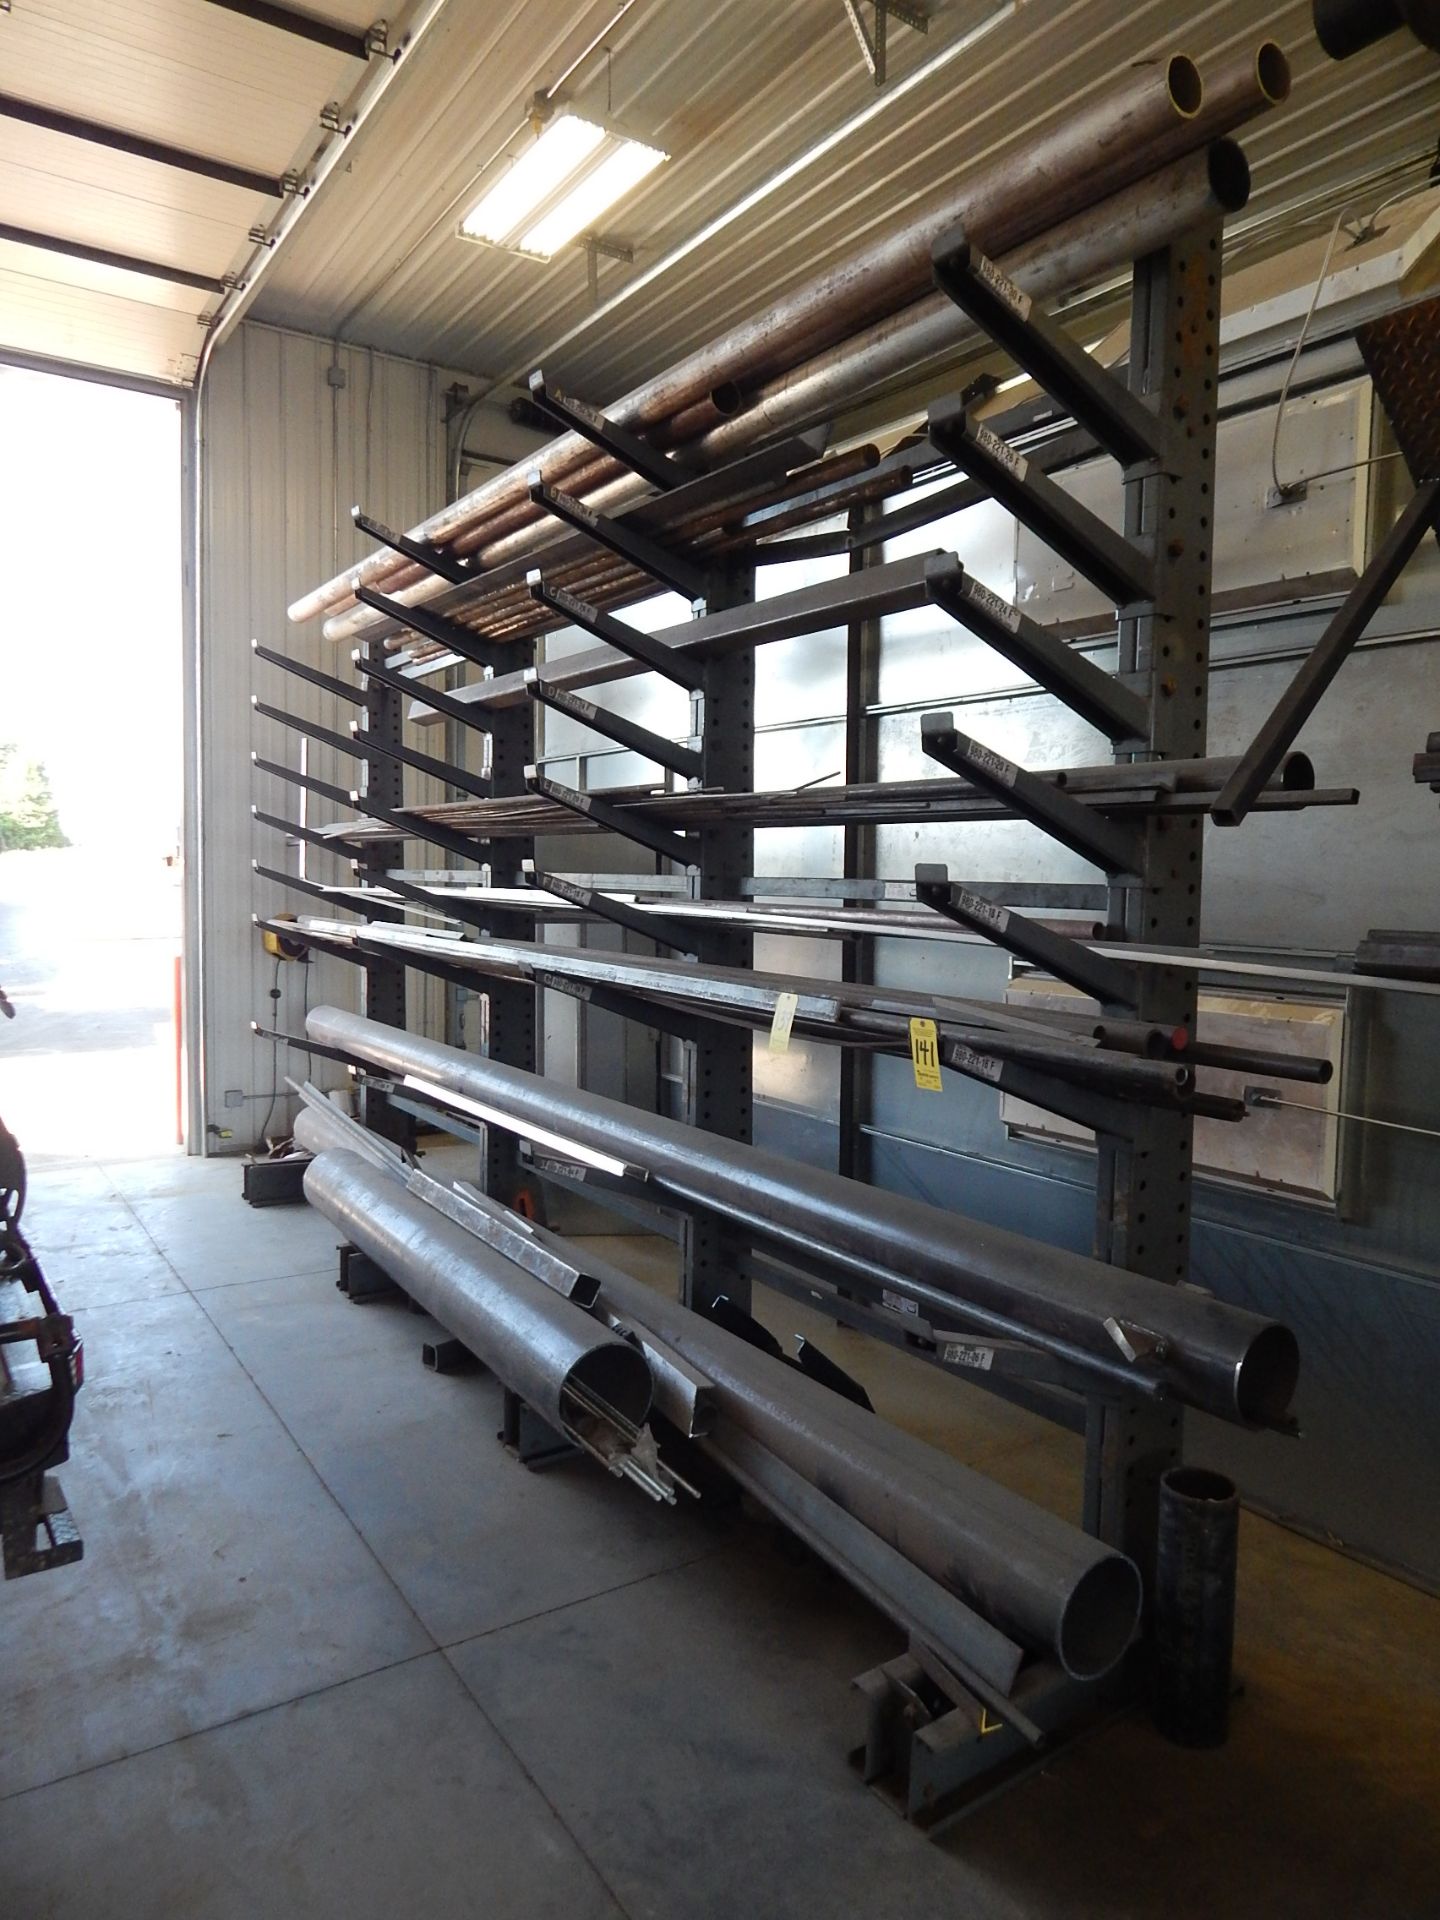 Cantilever Rack, 12' H x 18' W with 2' Cantilever Arms, Approx (30) Arms per rack